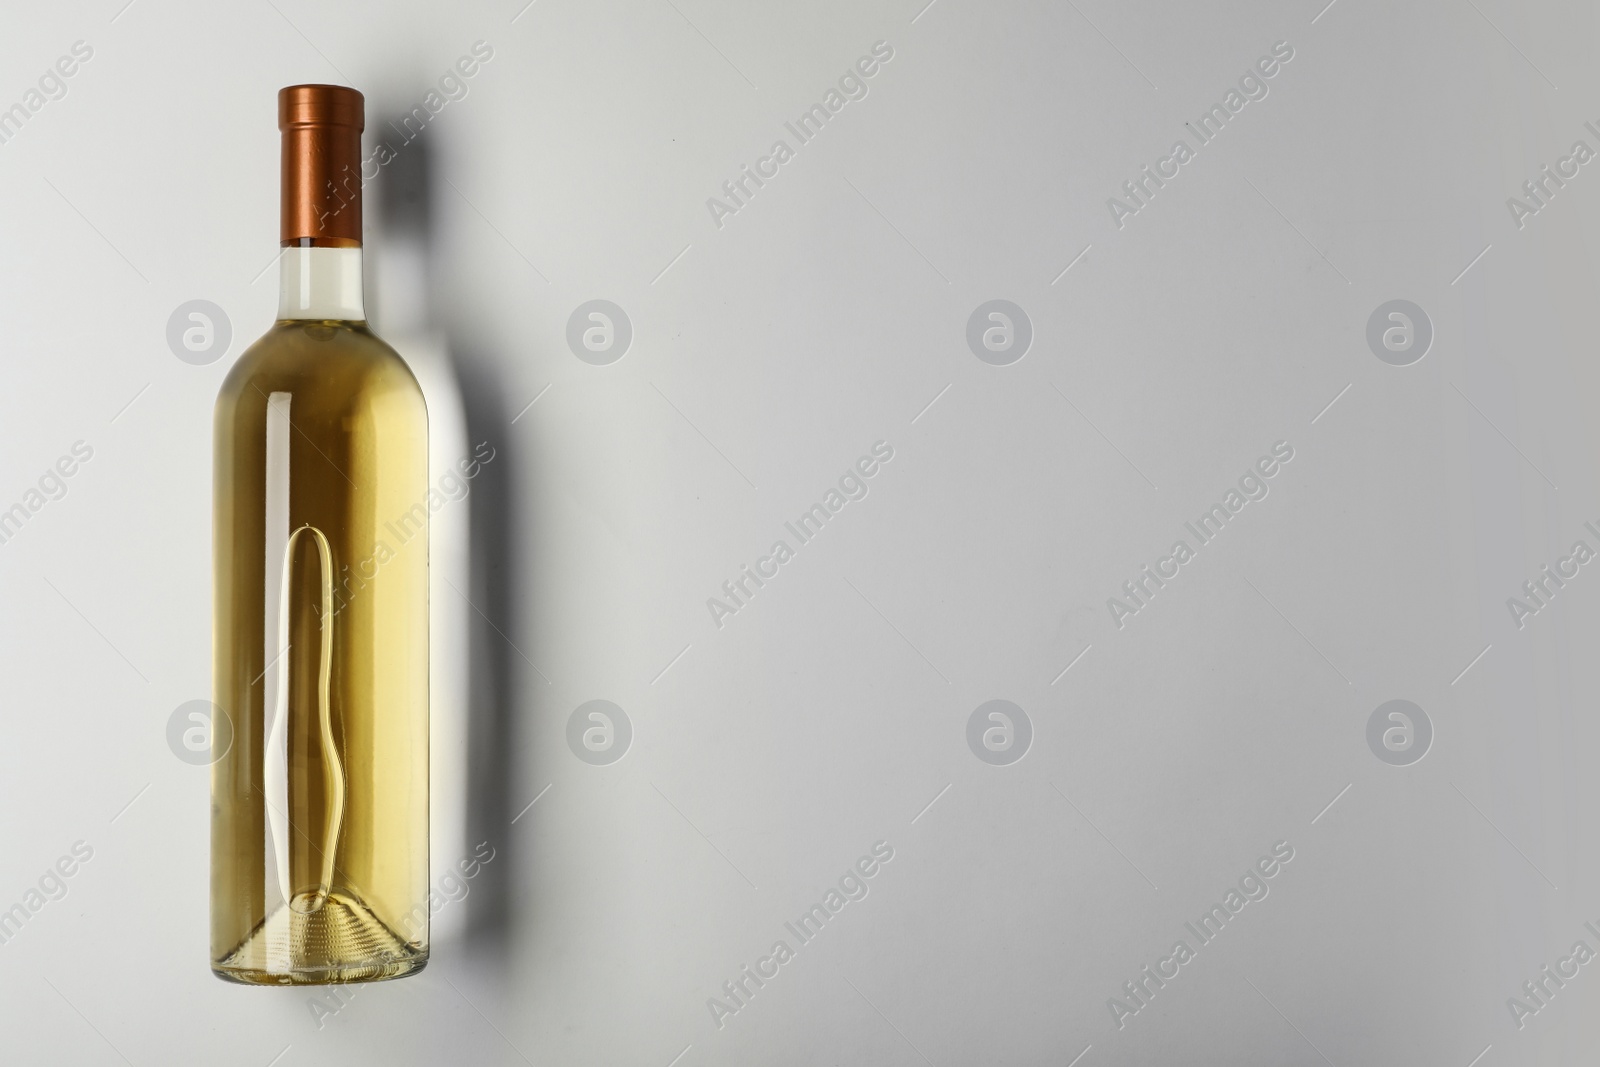 Photo of Bottle of expensive white wine on light background, top view